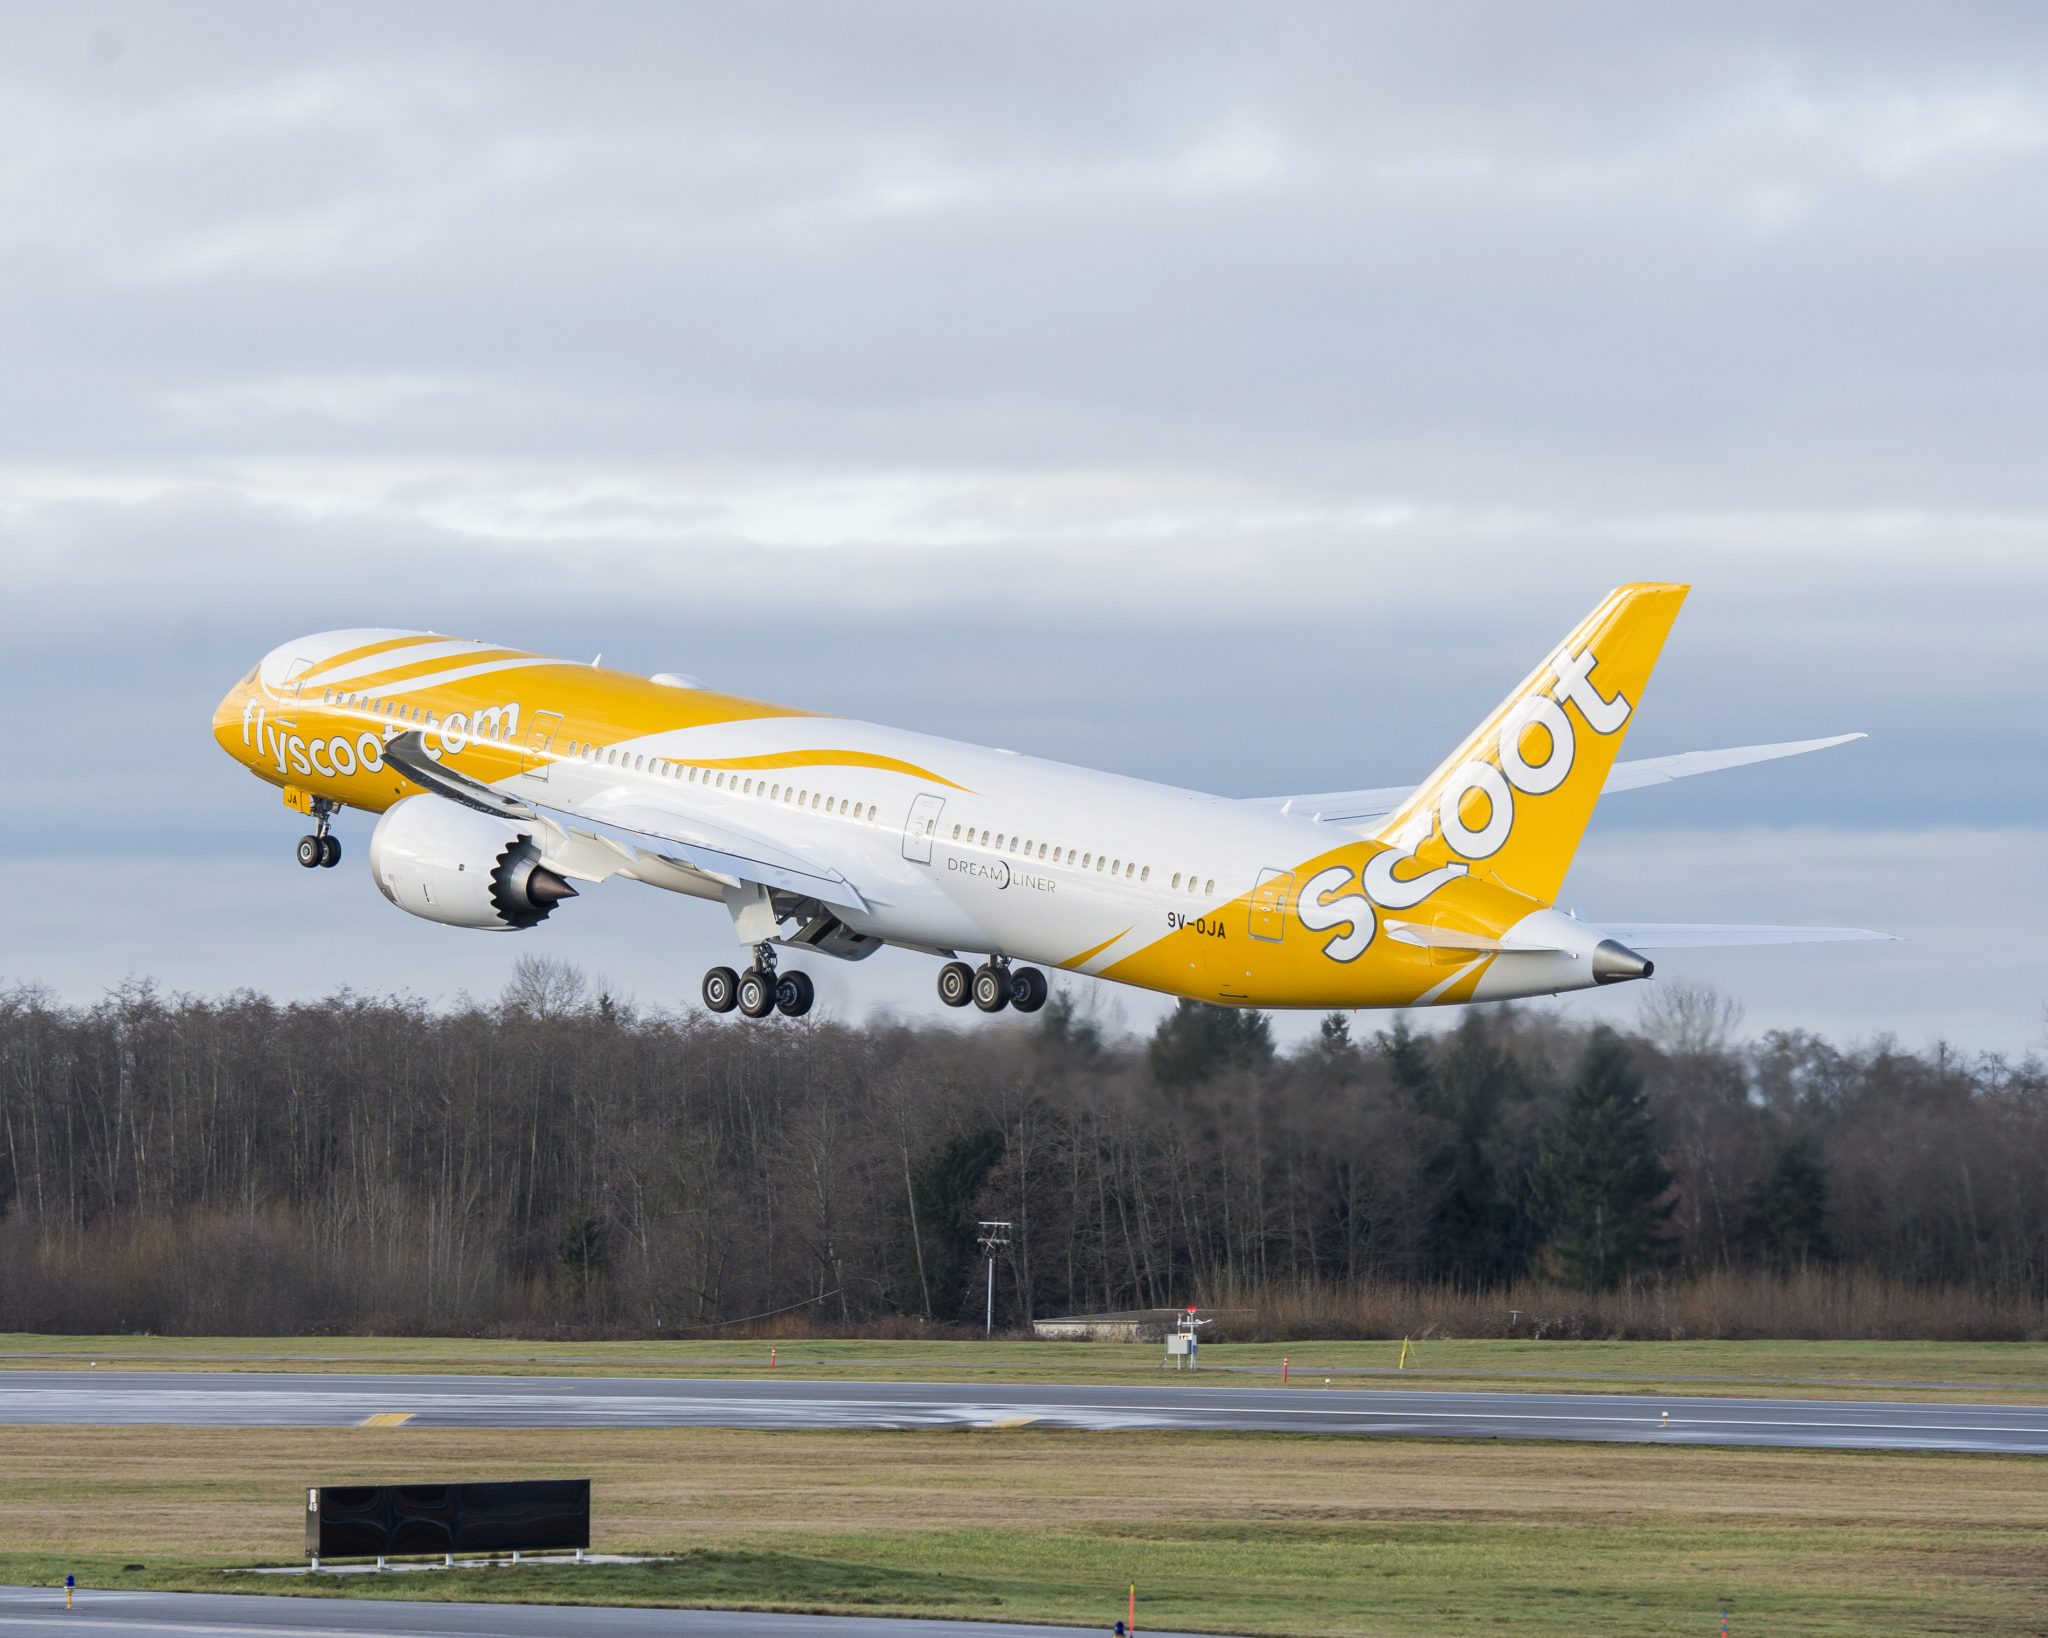 Power bank catches fire injuring two onboard Scoot flight